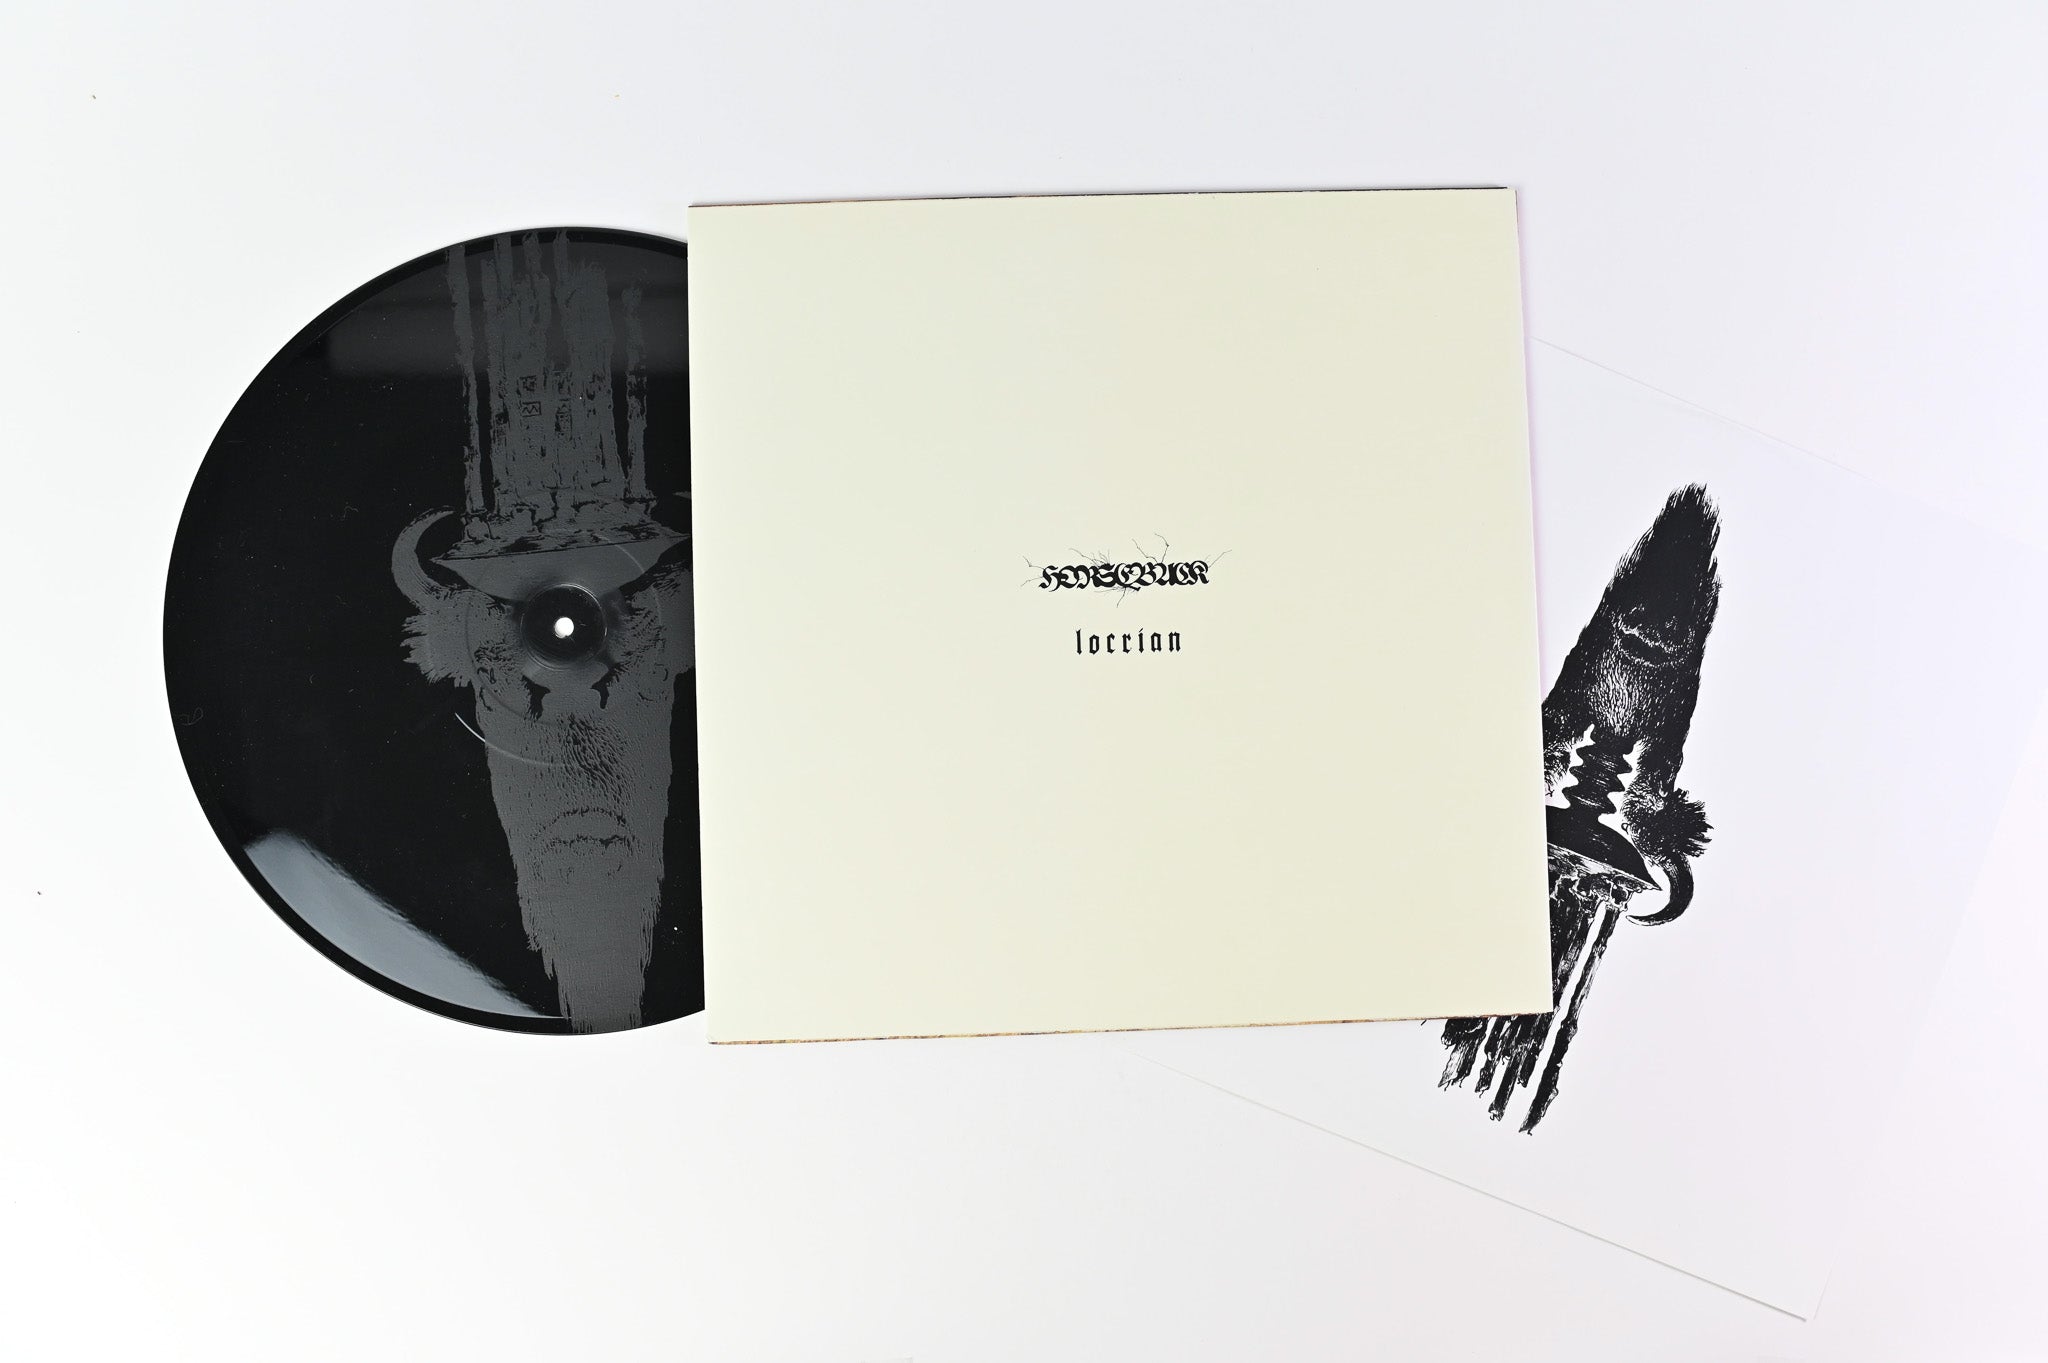 Horseback - New Dominions on Utech Single Sided Limited Edition Reissue